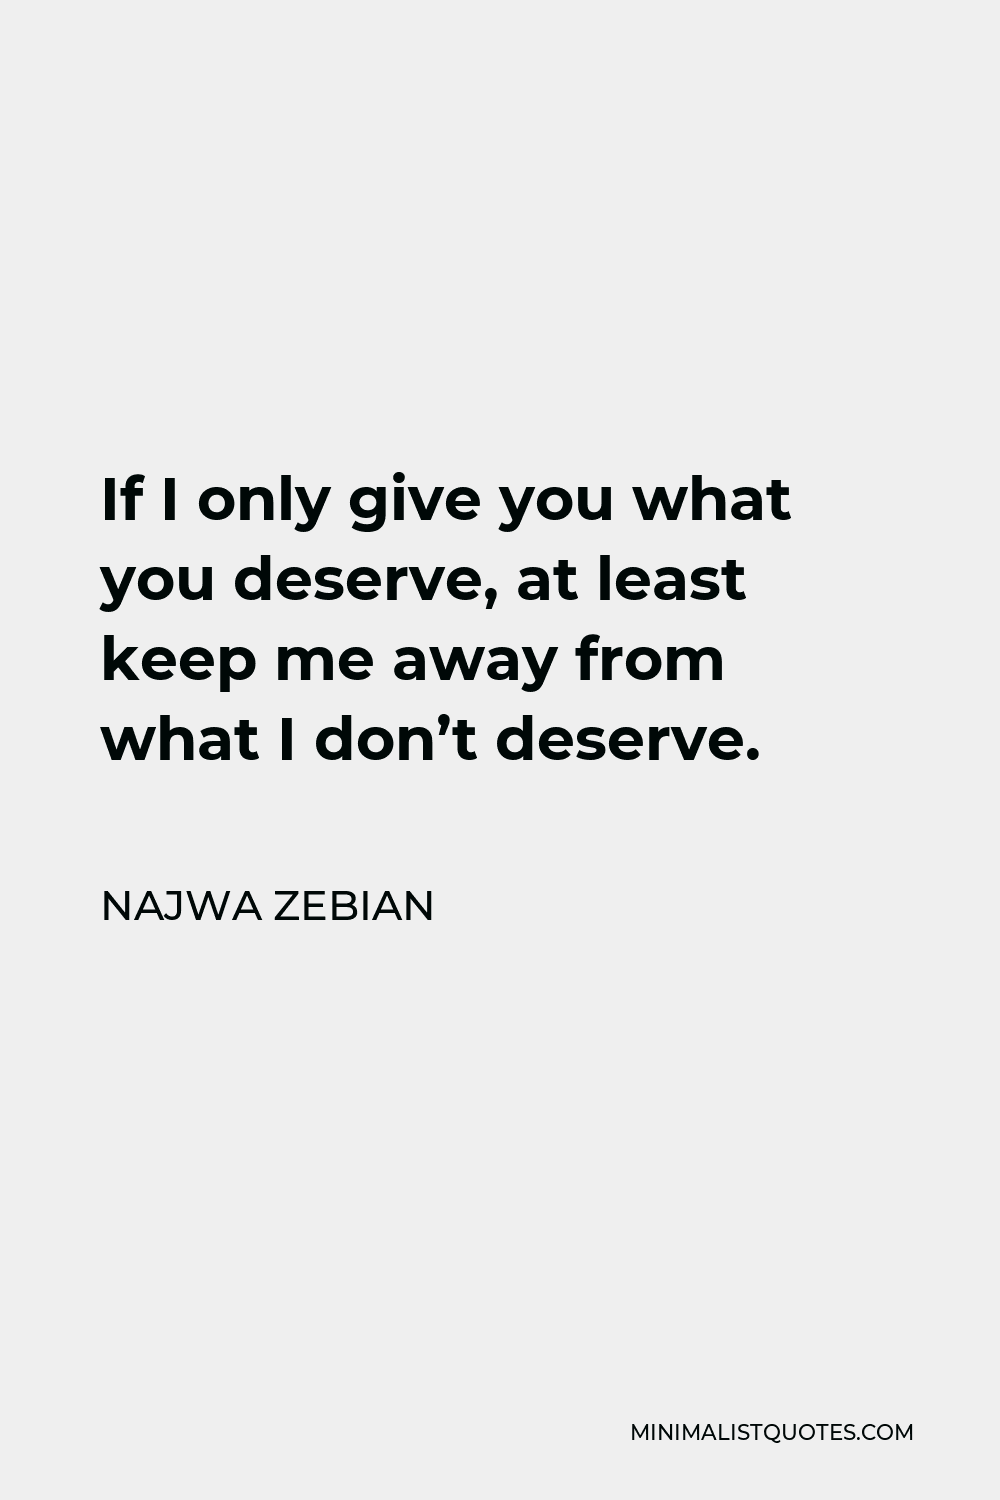 Najwa Zebian Quote - If I only give you what you deserve, at least keep me away from what I don’t deserve.